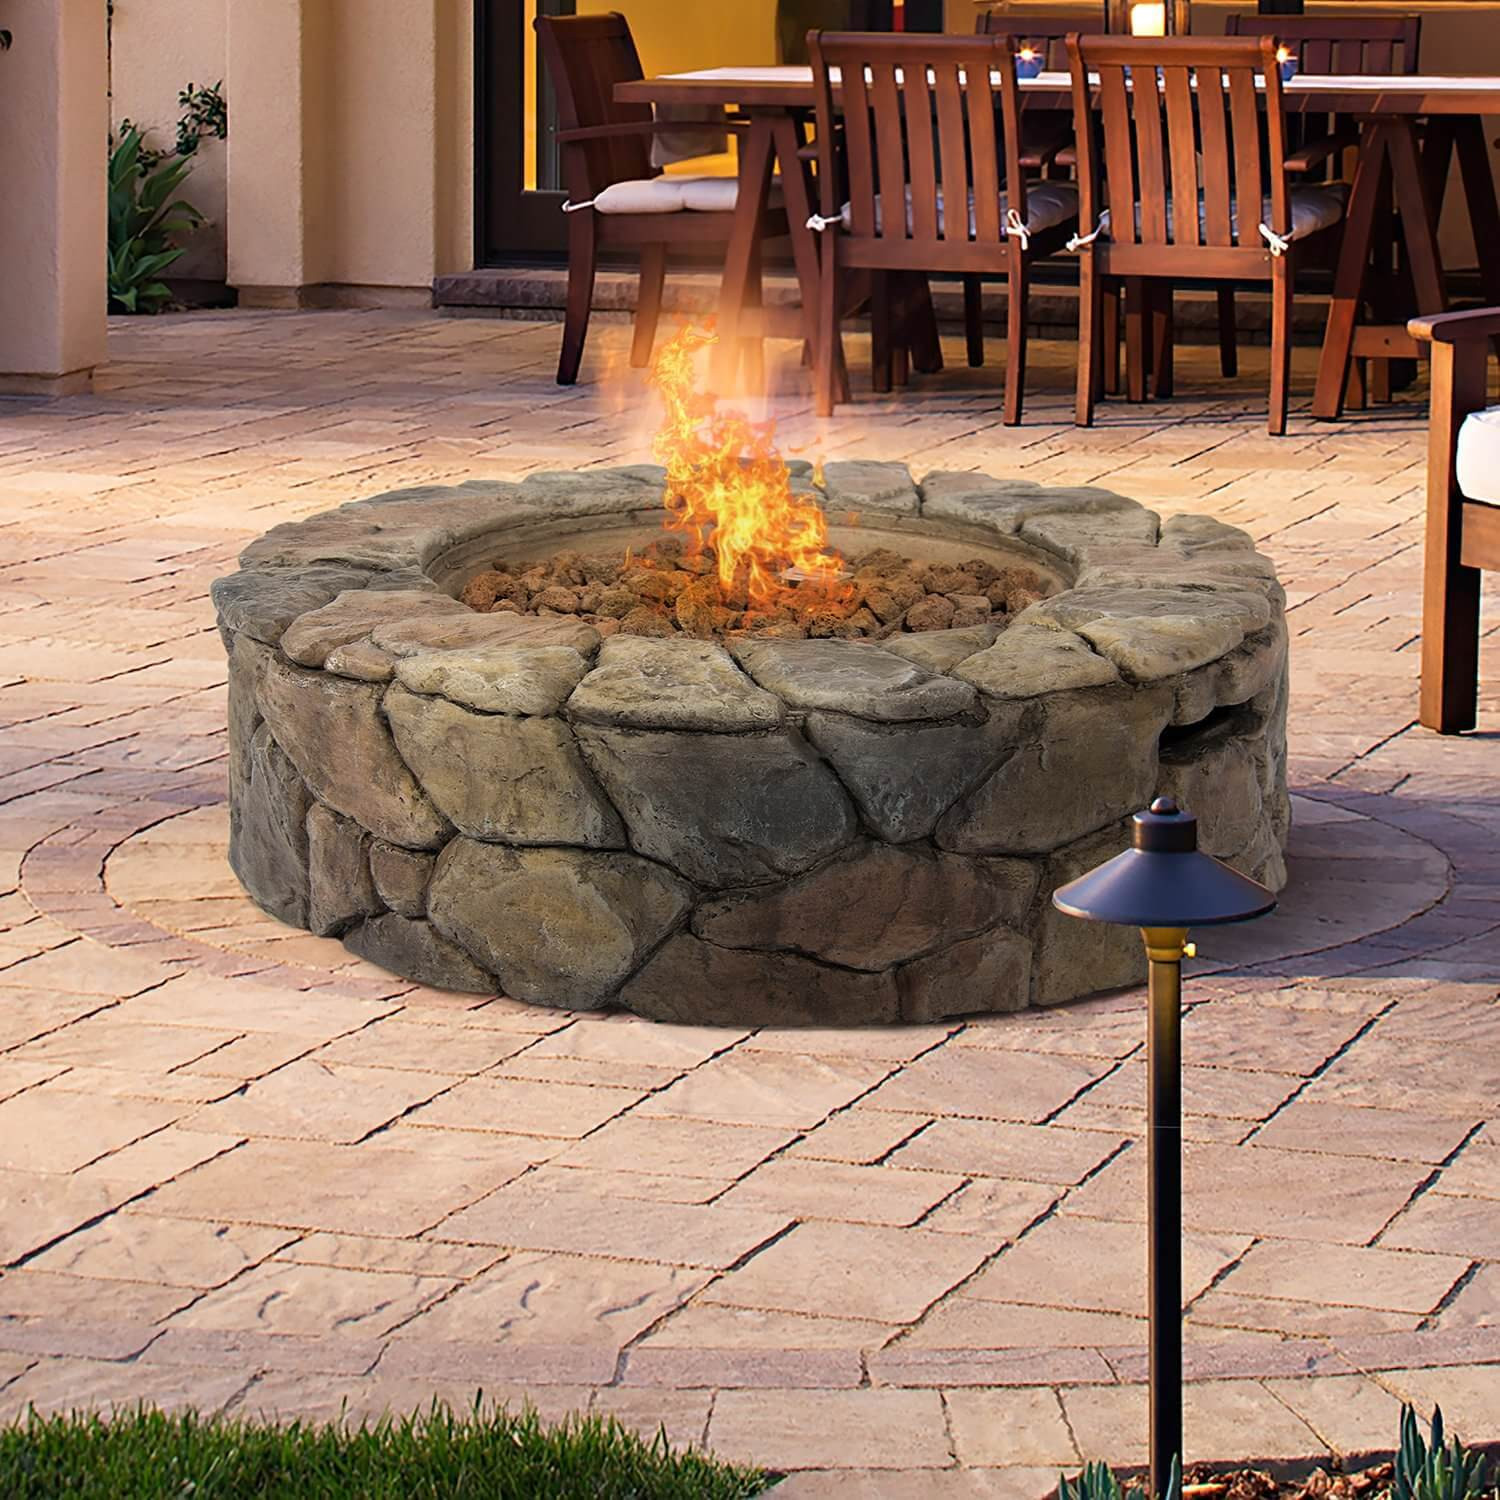 Natural Gas Patio Fire Pit
 Top 15 Types of Propane Patio Fire Pits with Table Buying